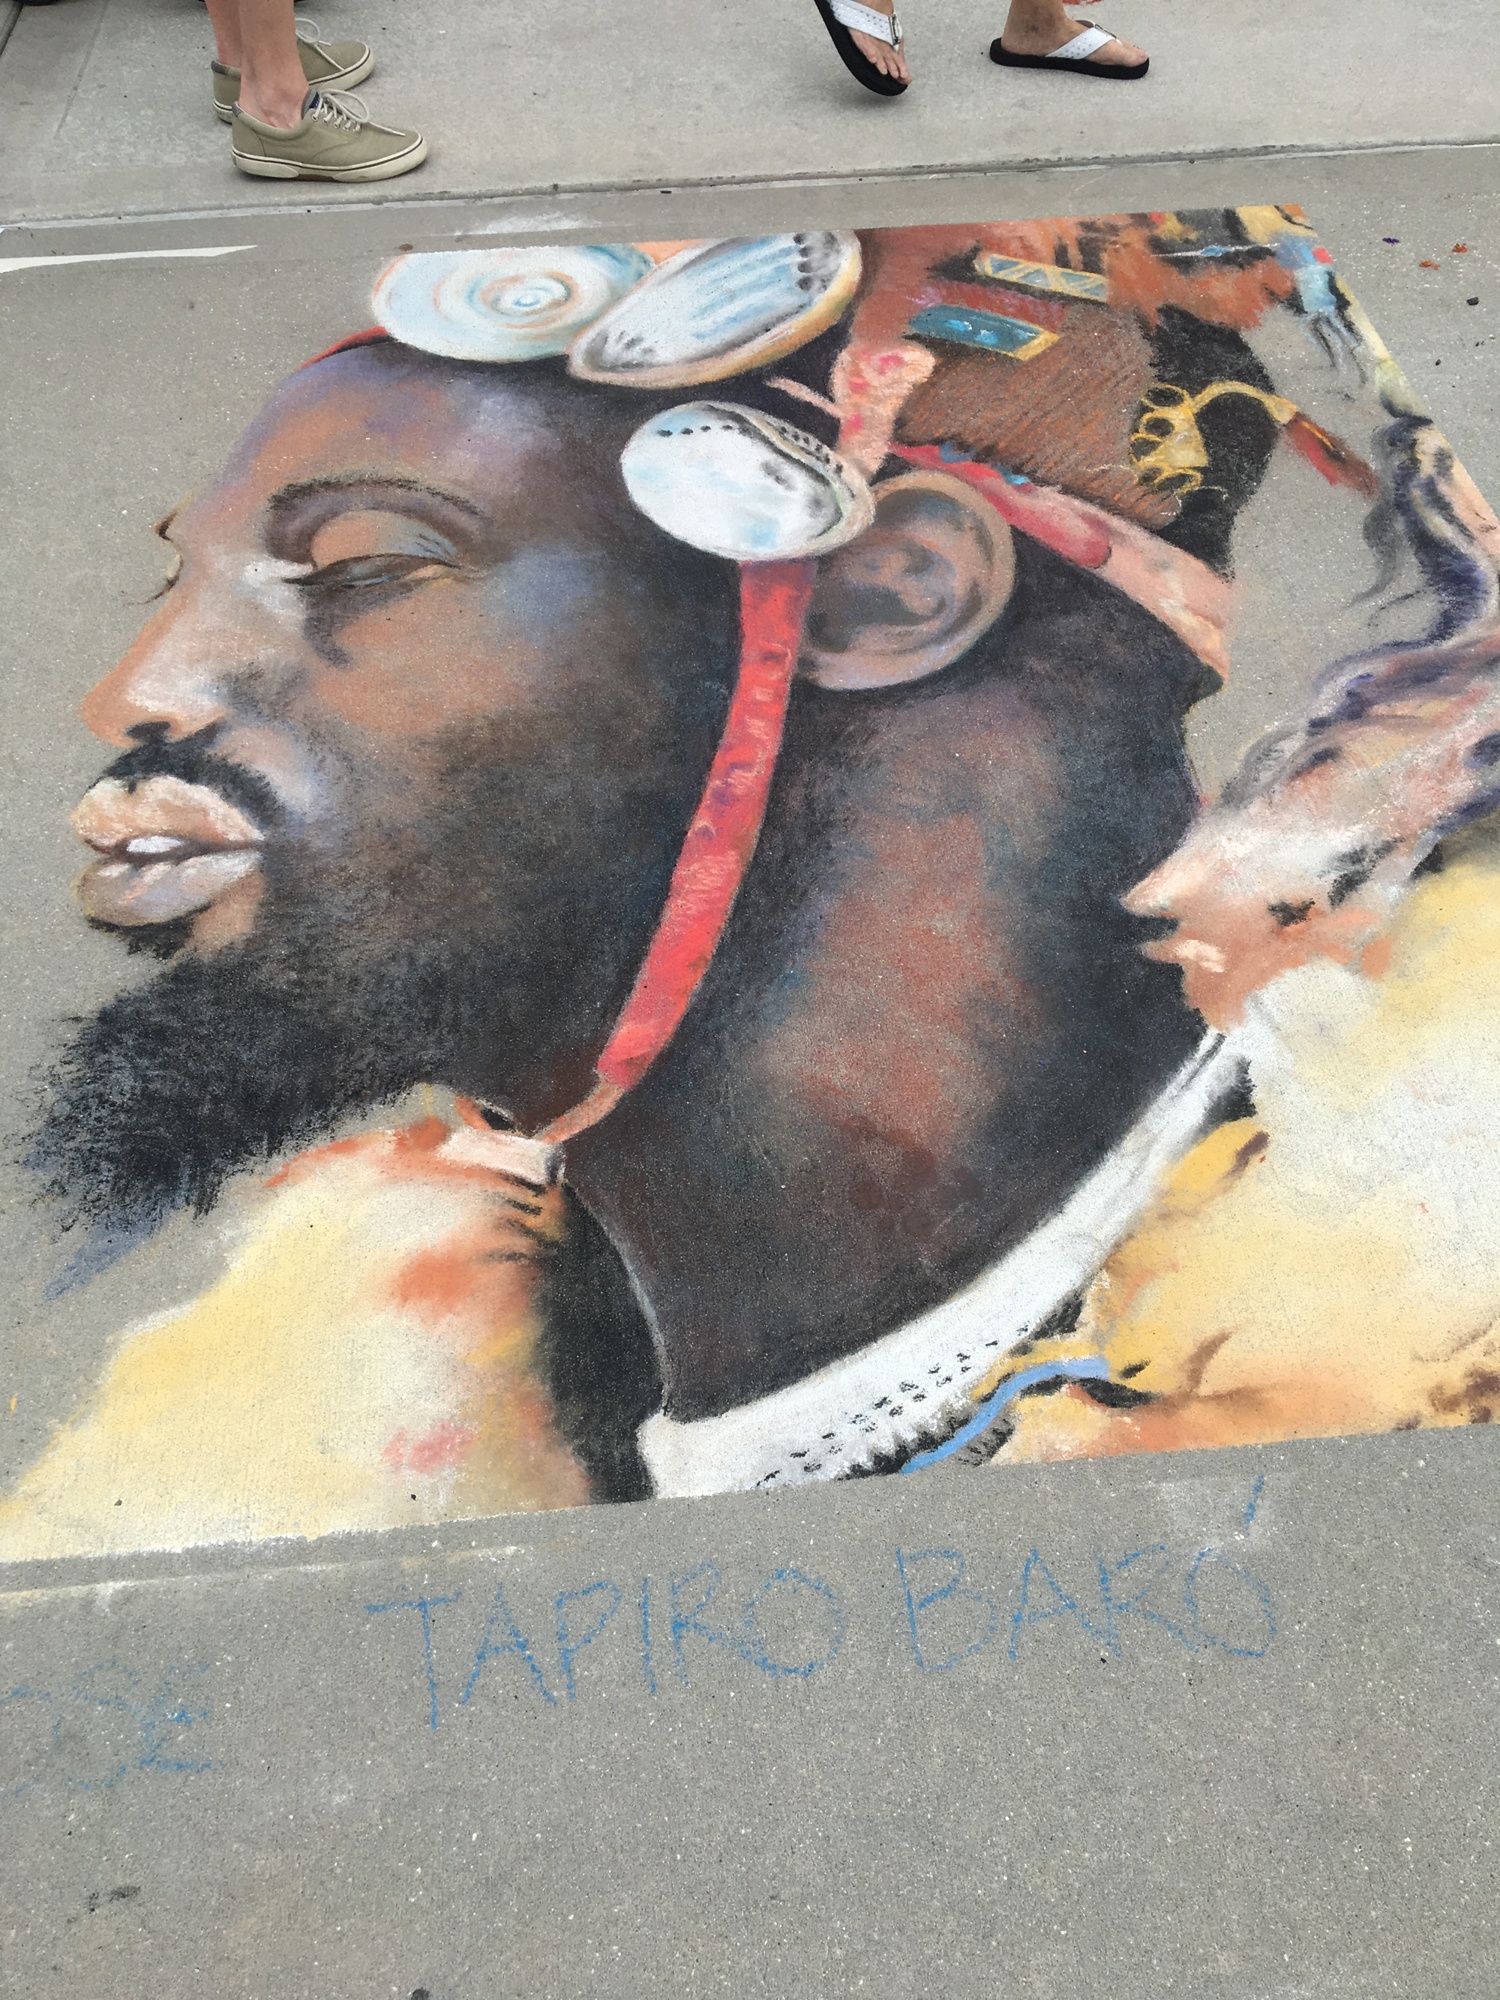 The mural that won Best in Show during the 2018 Chalkin’ It Up sidewalk art contest.  